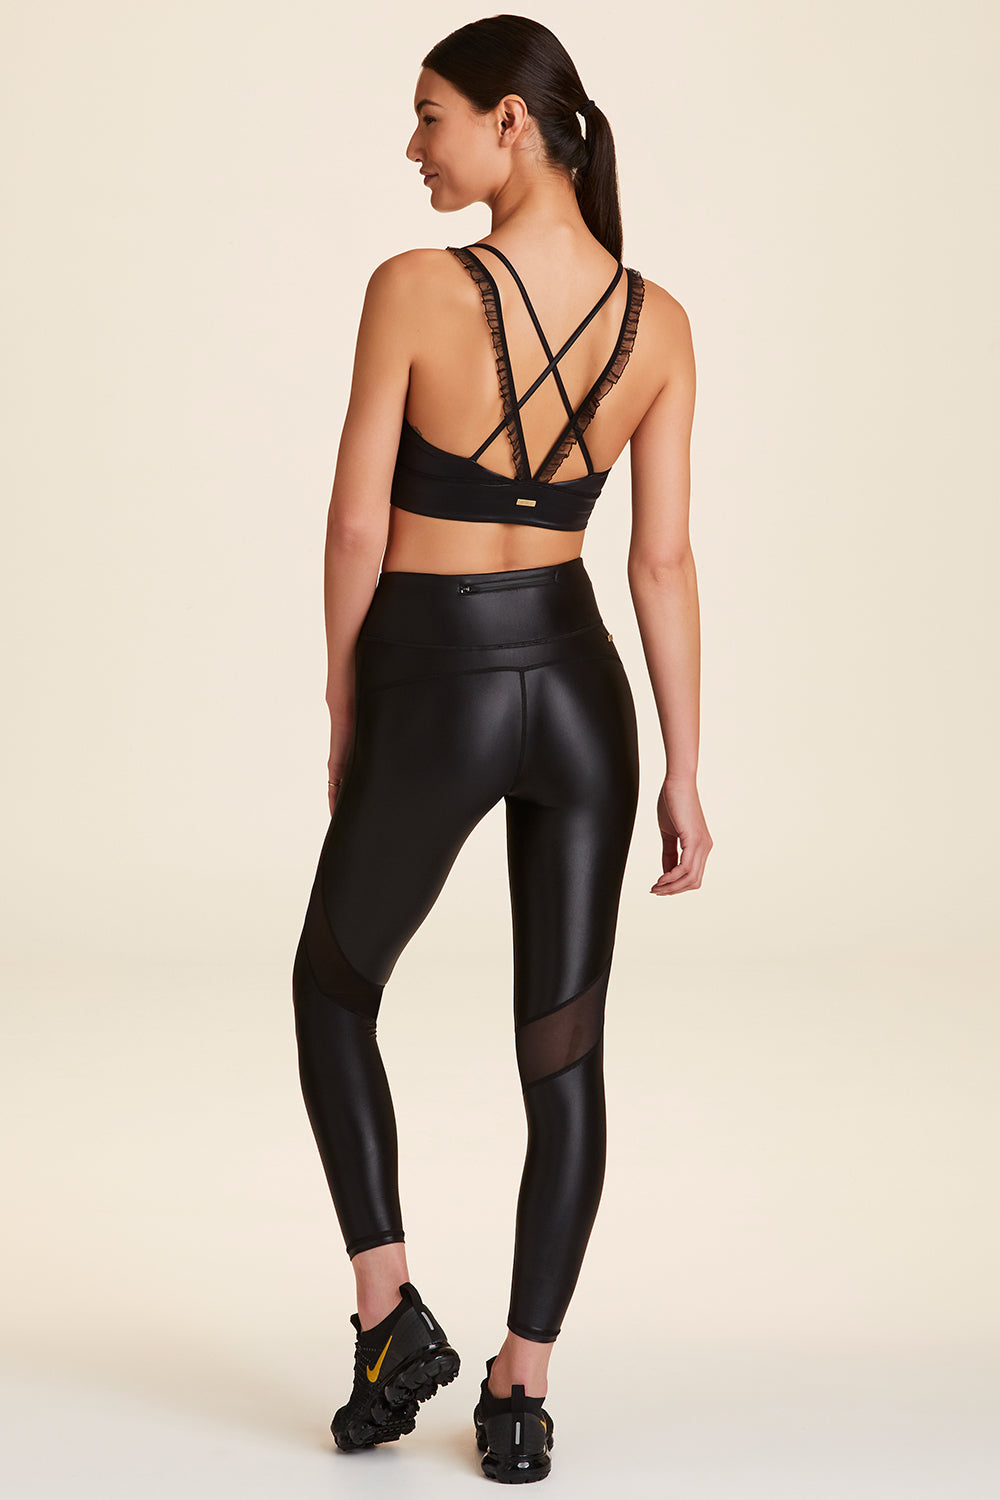 Back full body view of Alala Women's Luxury Athleisure ribbon bra in black liquid black with ribbon detailing on straps